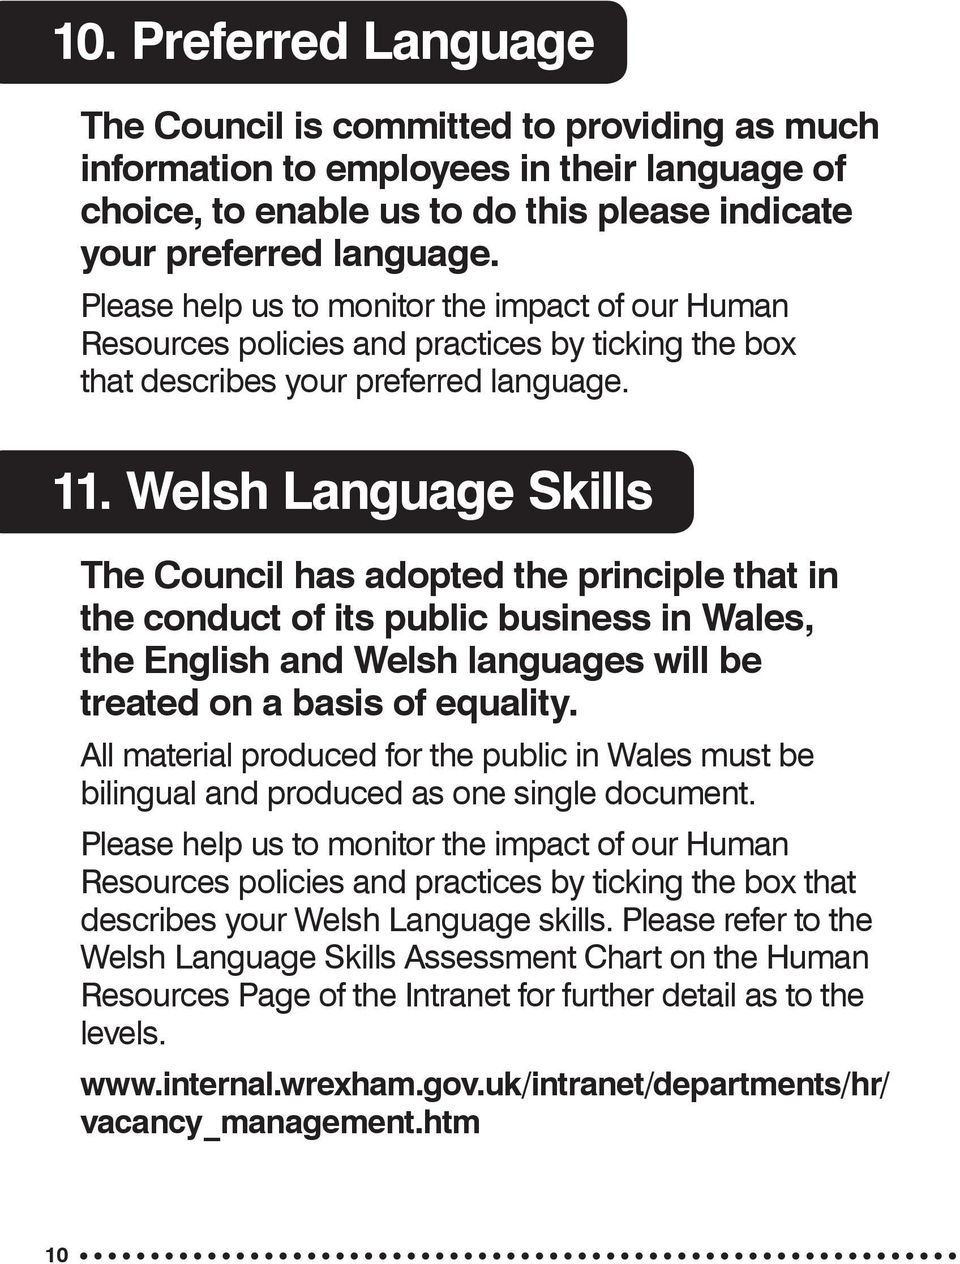 Welsh Language Skills The Council has adopted the principle that in the conduct of its public business in Wales, the English and Welsh languages will be treated on a basis of equality.